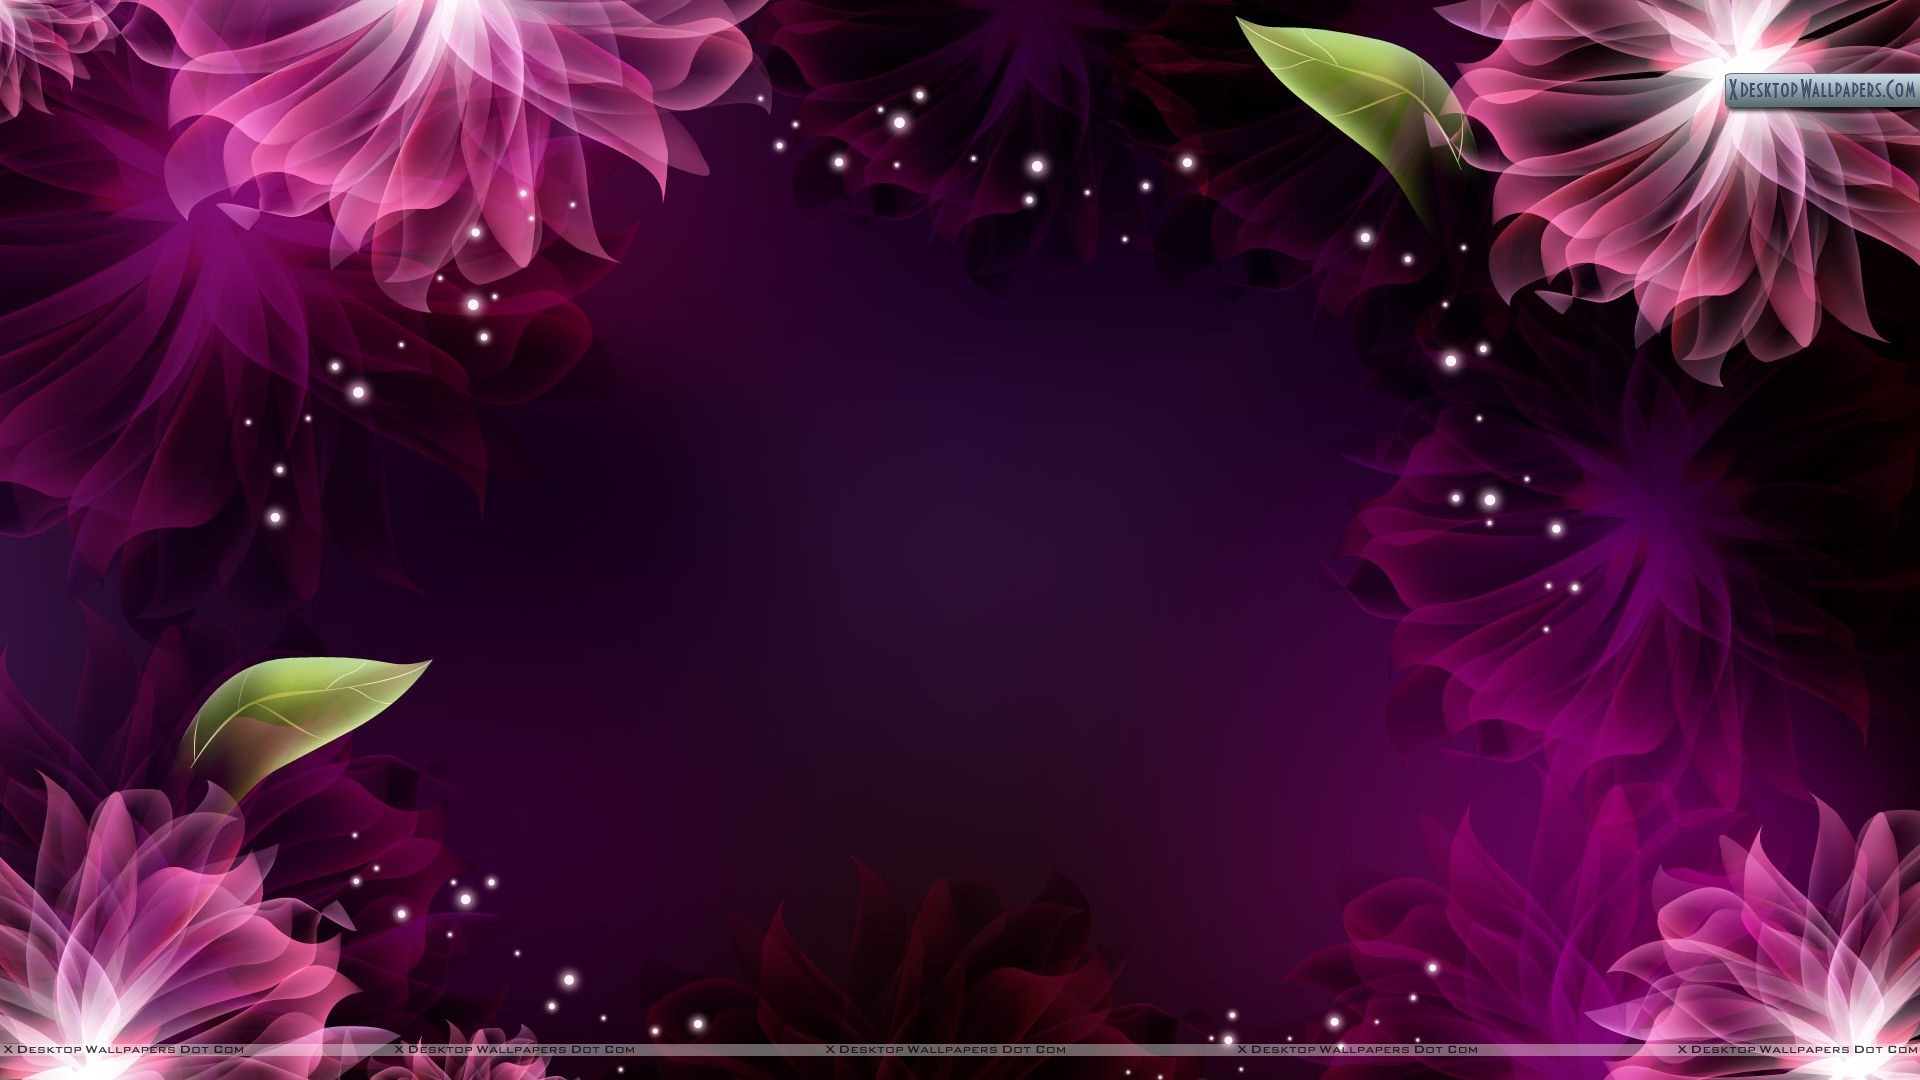 1920x1080 Colorful Abstract Backgrounds 2953 Hd Wallpapers in Abstract .